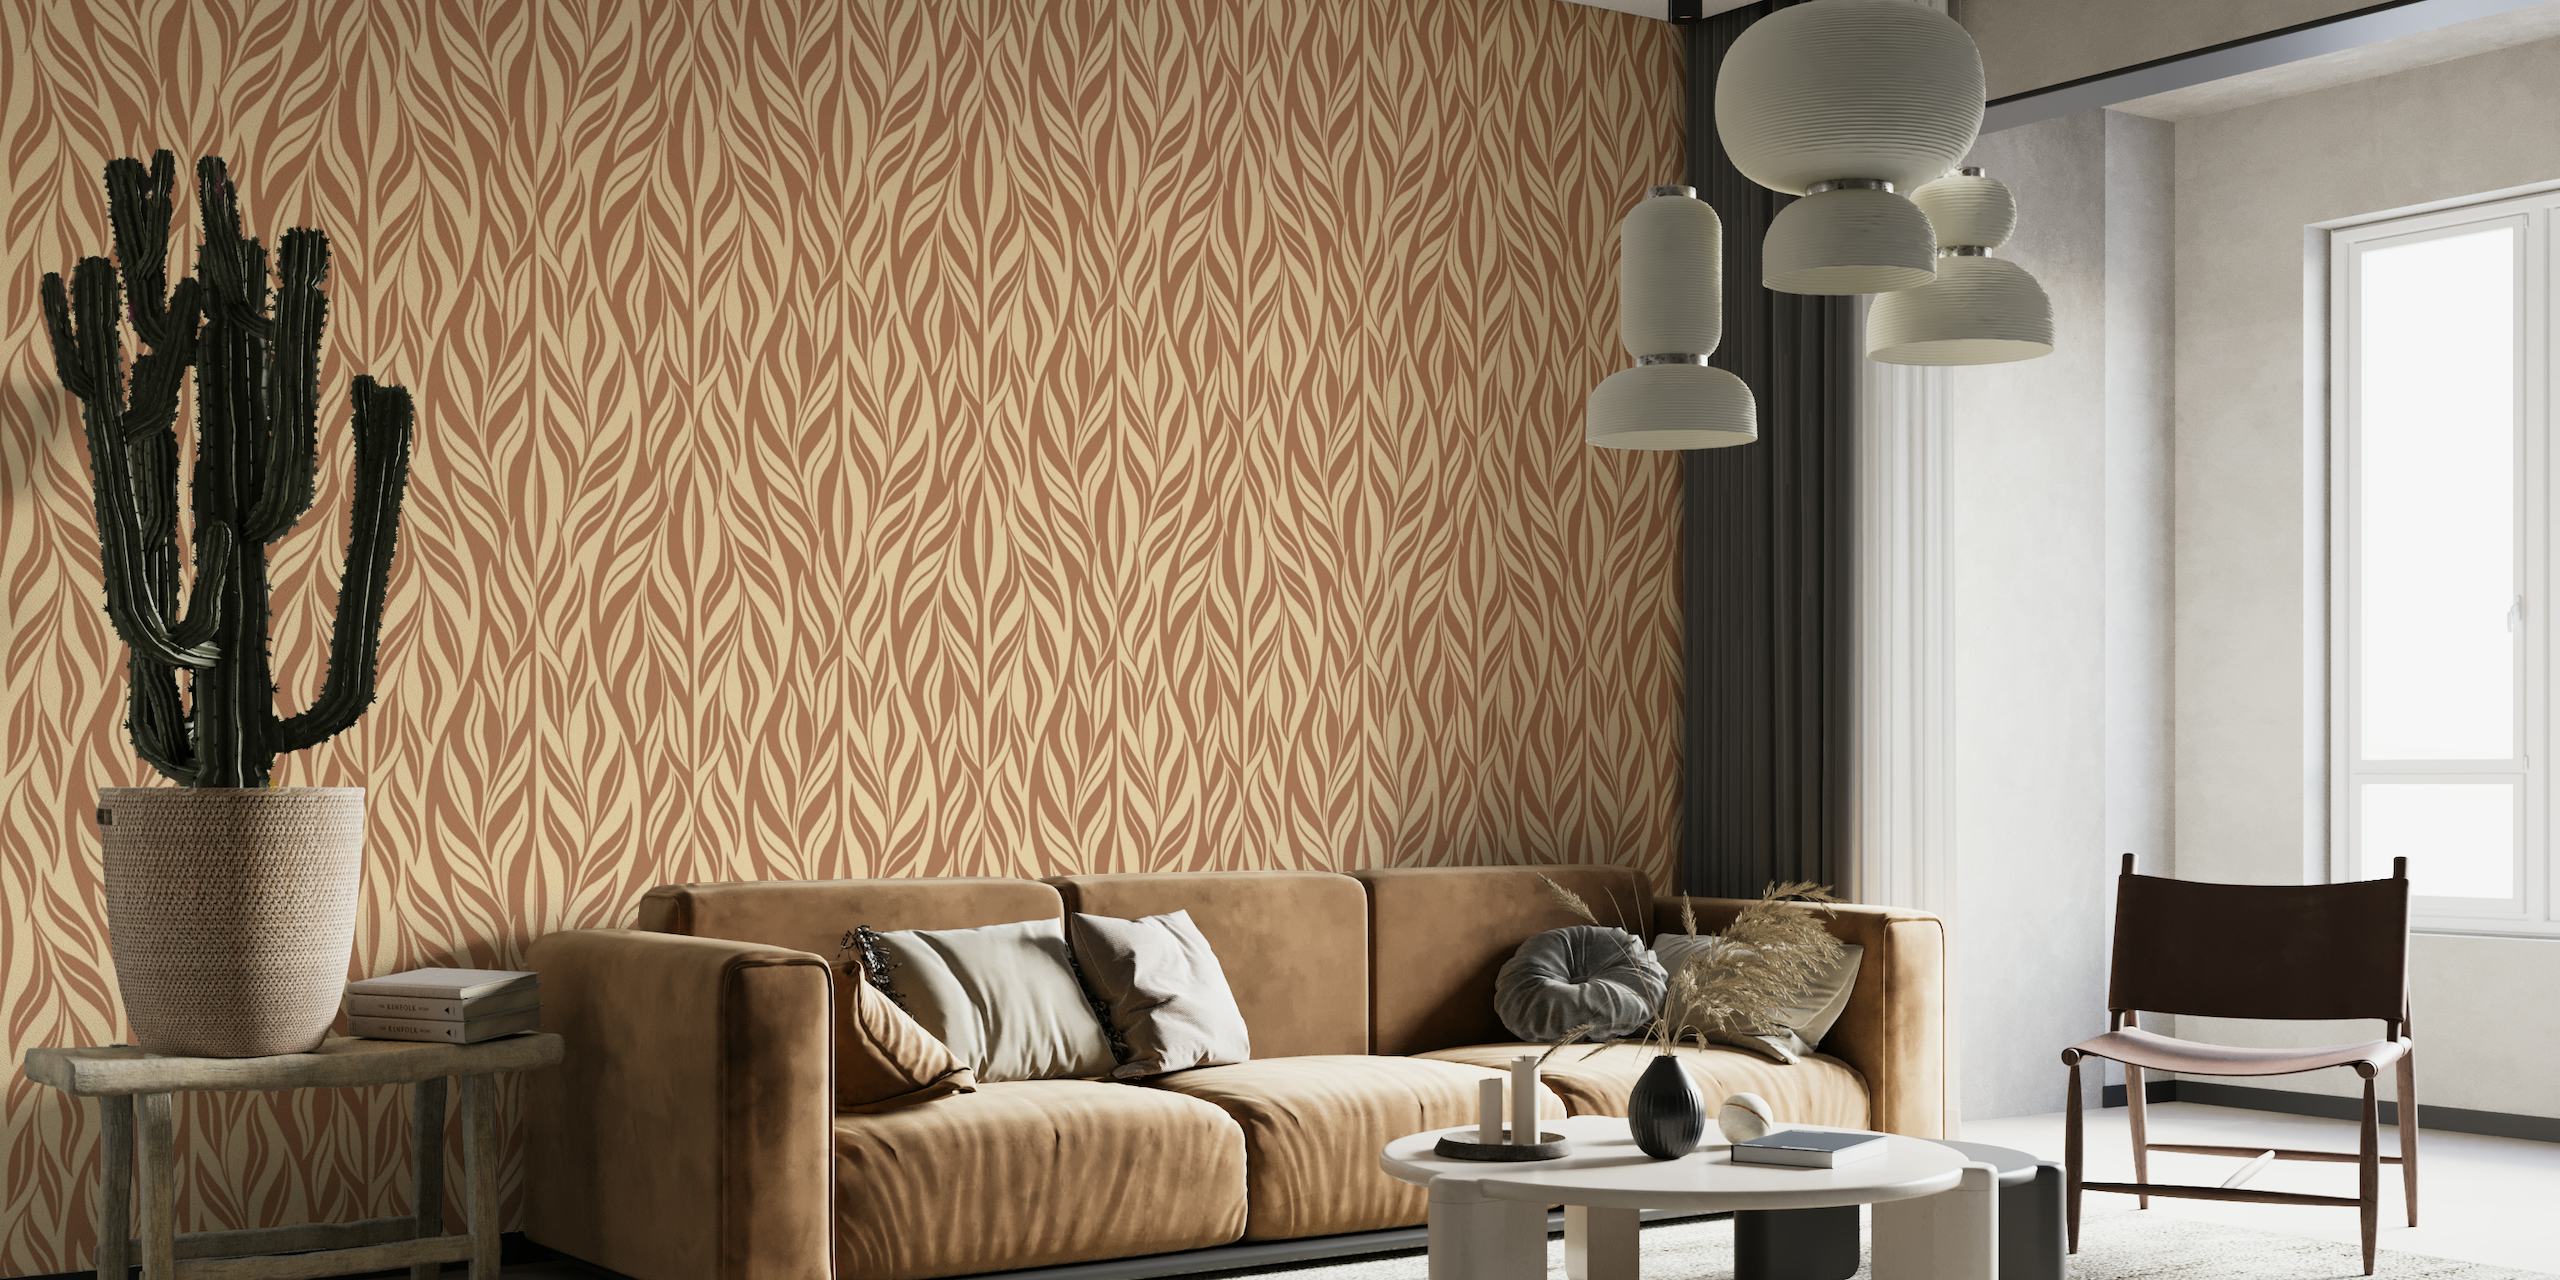 Warm African Leaves wall mural depicting elongated leaf patterns in earthy tones